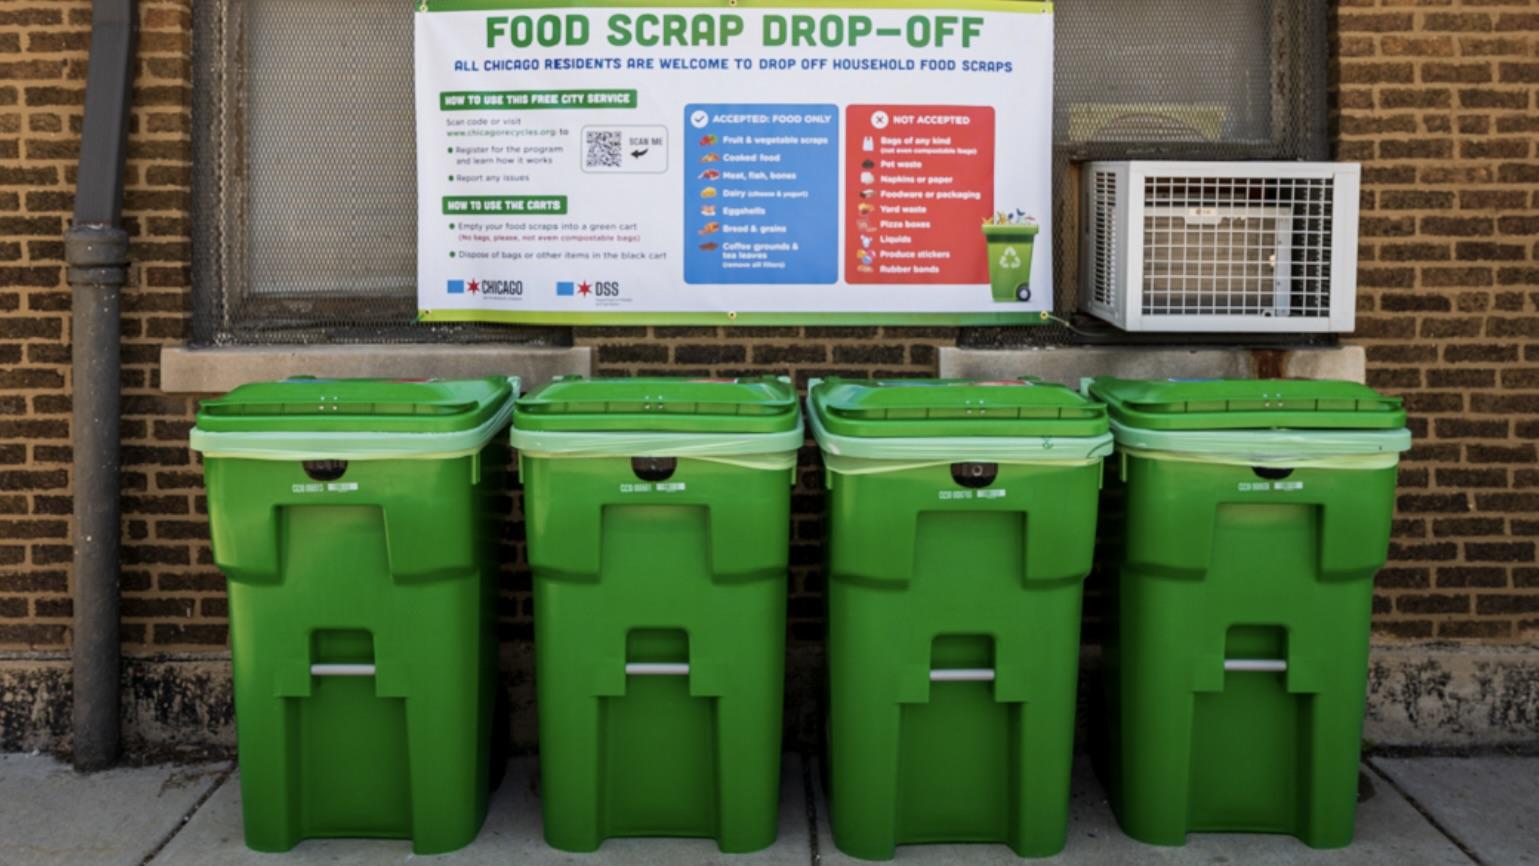 Chicagoans can bring their food waste to one of 15 locations across the city and dispose of it in a green bin, officials said. (Credit: City of Chicago)